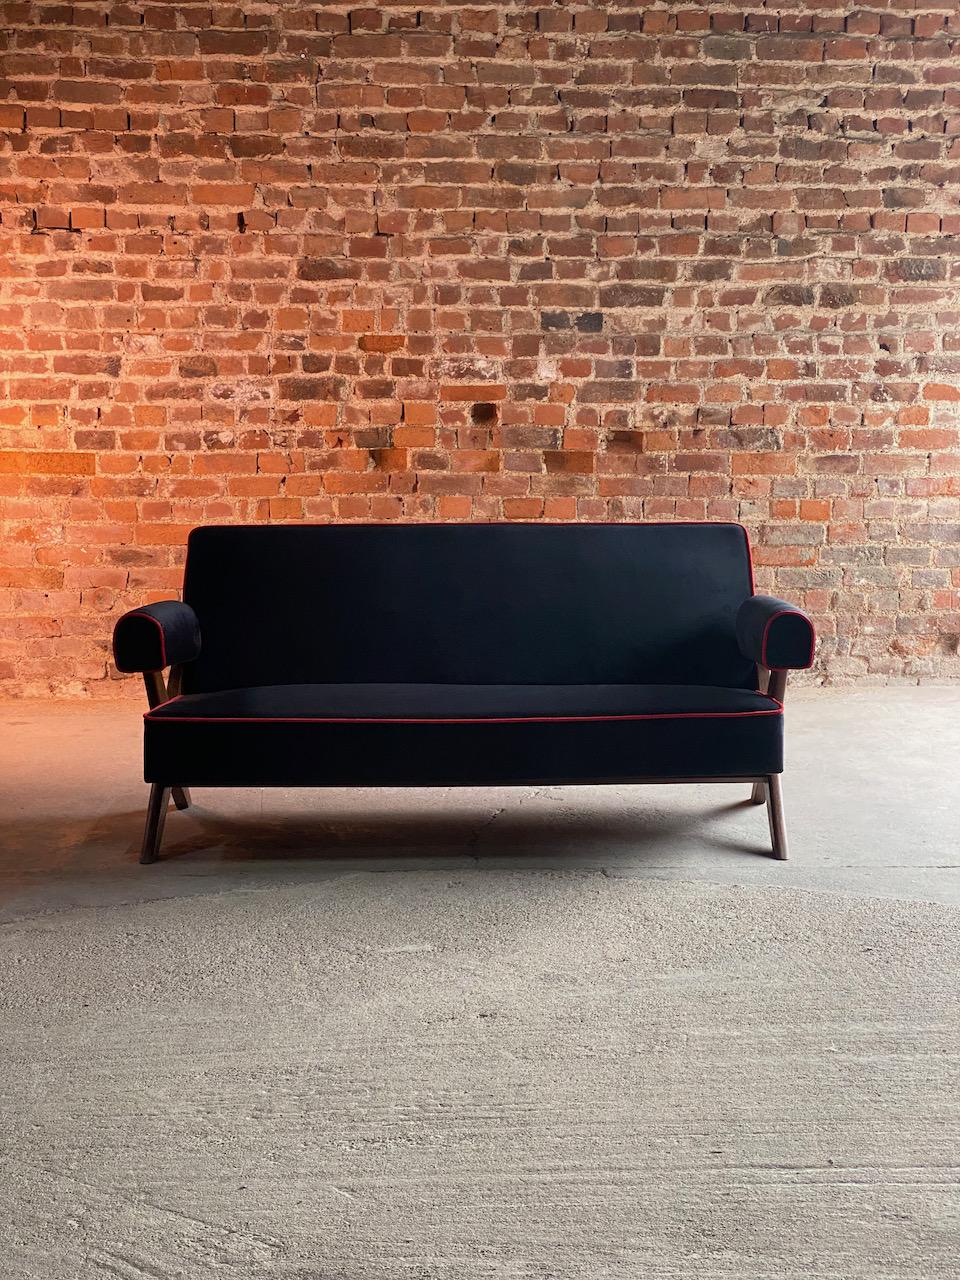 Mid-20th Century Pierre Jeanneret PJ-010806 ‘Easy Lounge’ Sofa Circa 1958-59 For Sale